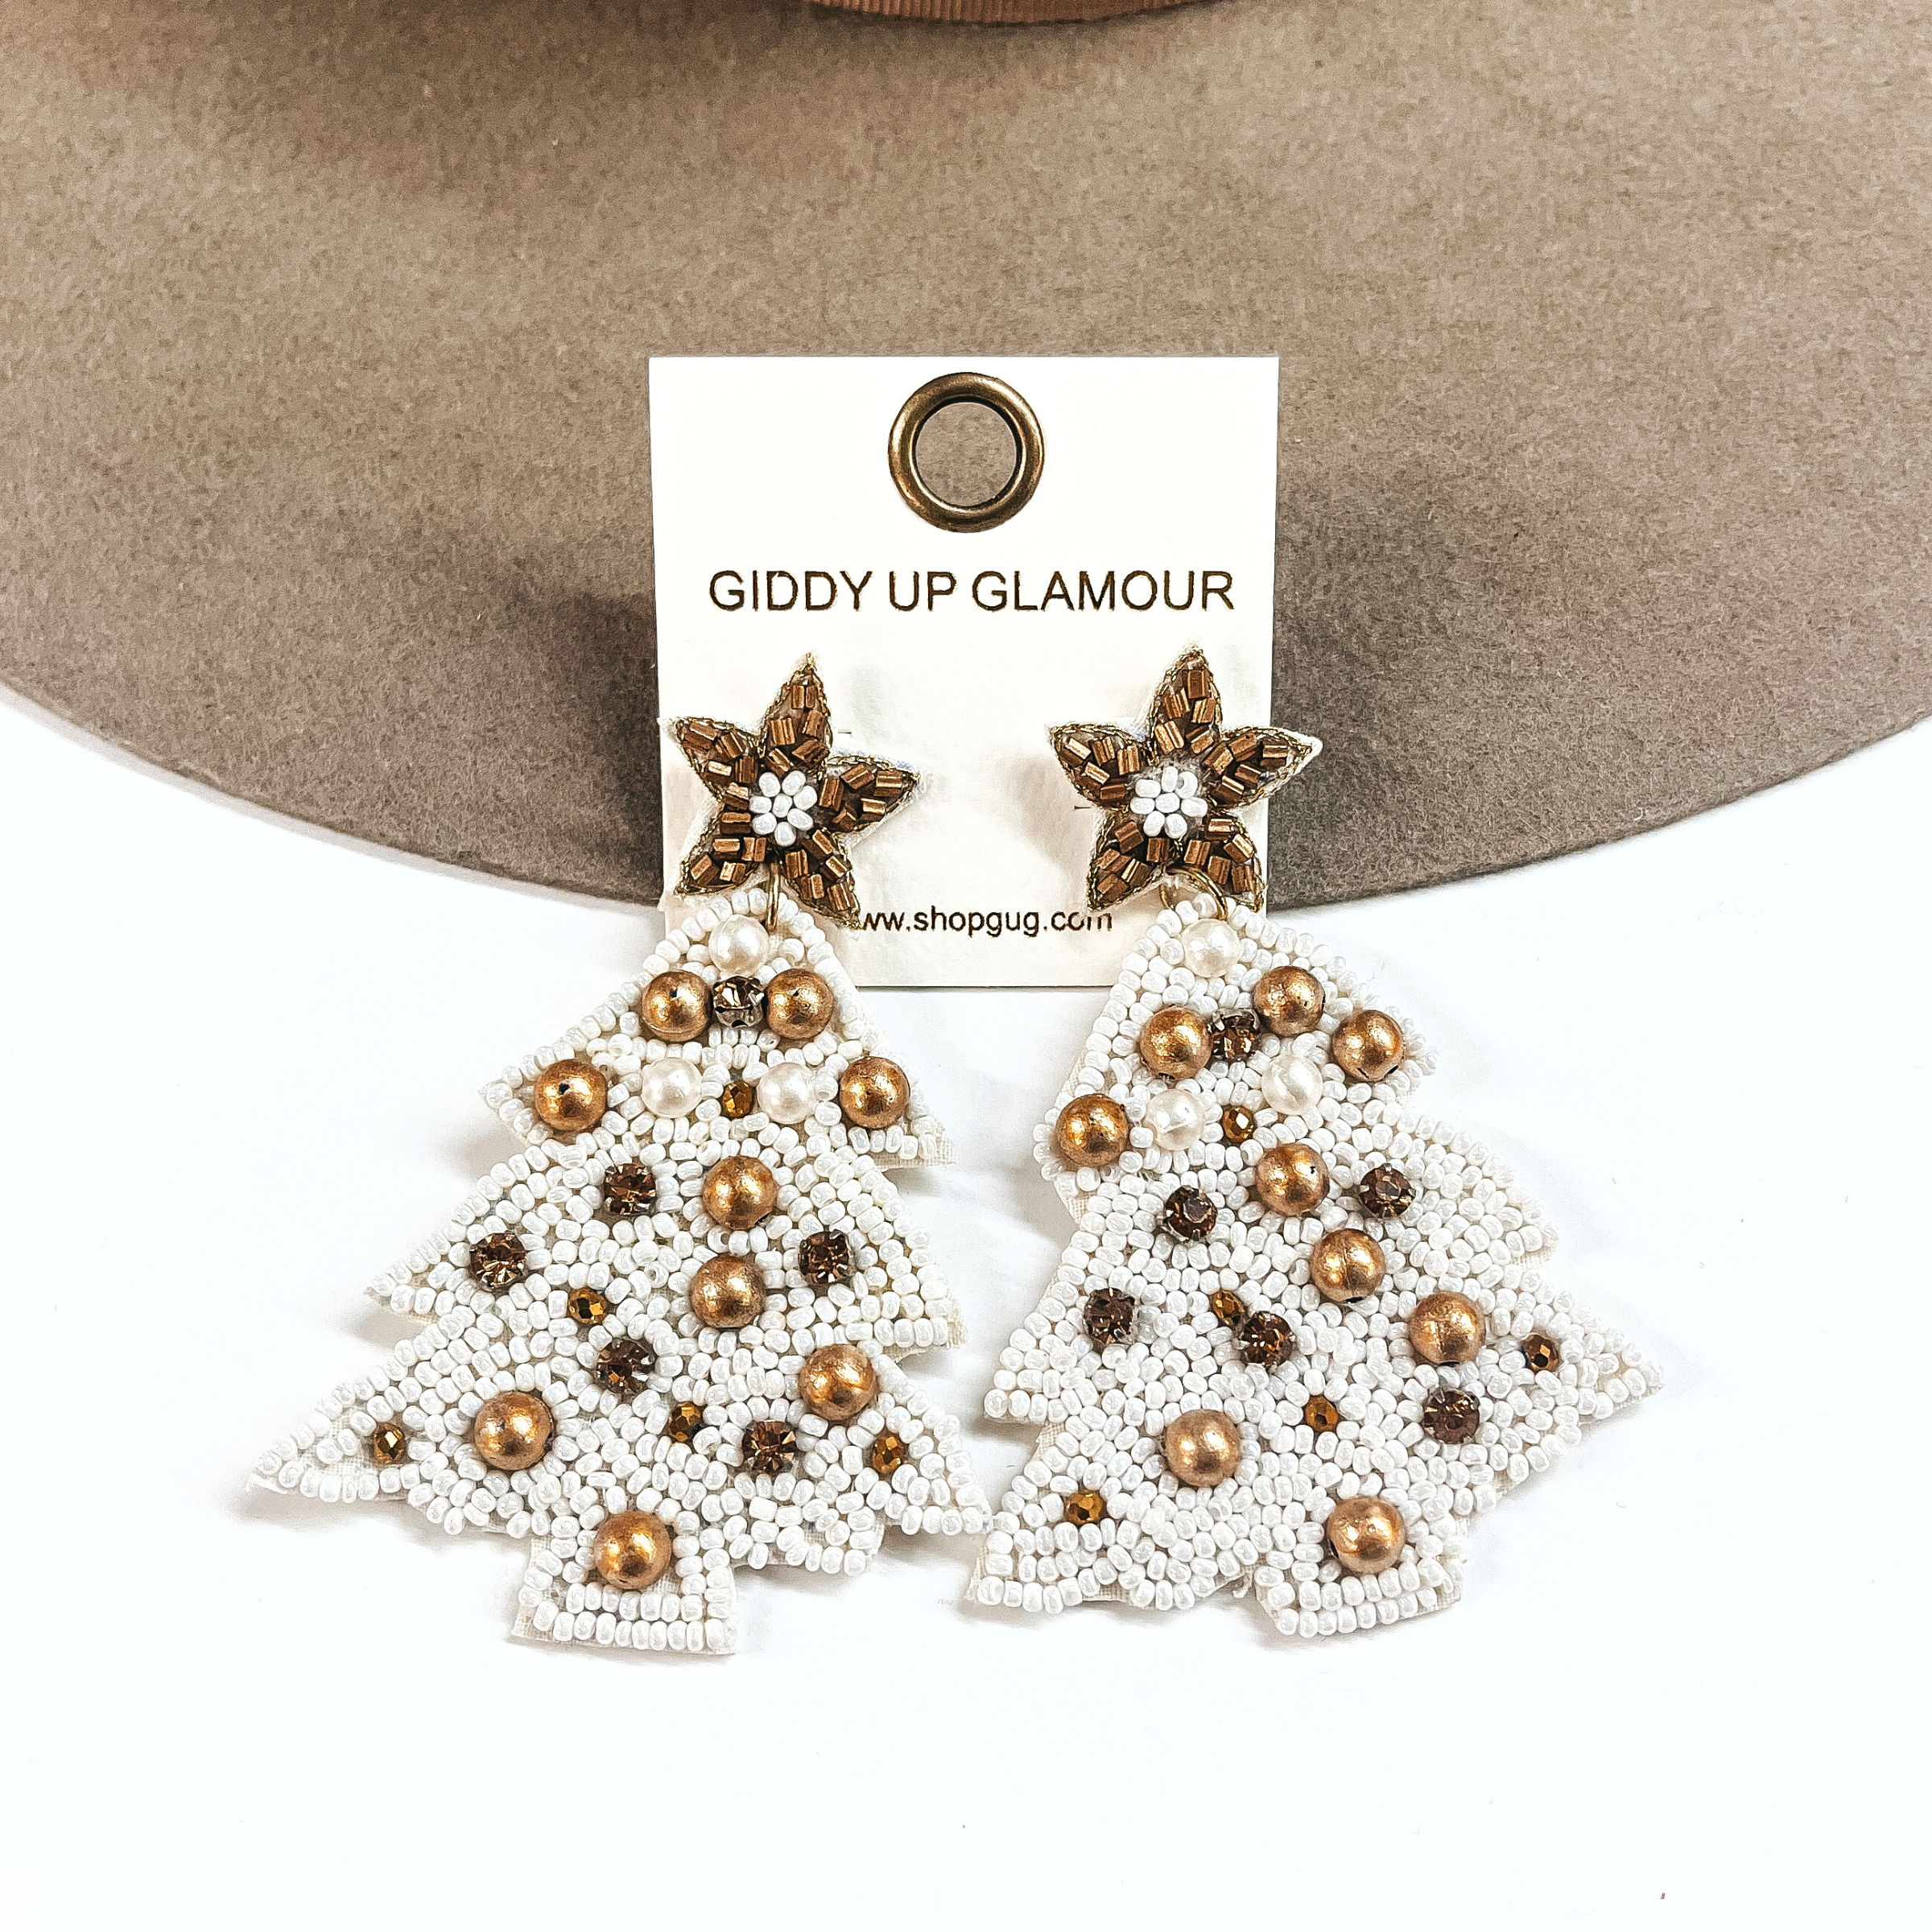 This is an ivory/white beaded christmas tree earrings with a gold beaded postback. There are matte gold beads all over and topaz colored crystals as well. These earrings are taken leaning against a light brown felt hat and on a white background.